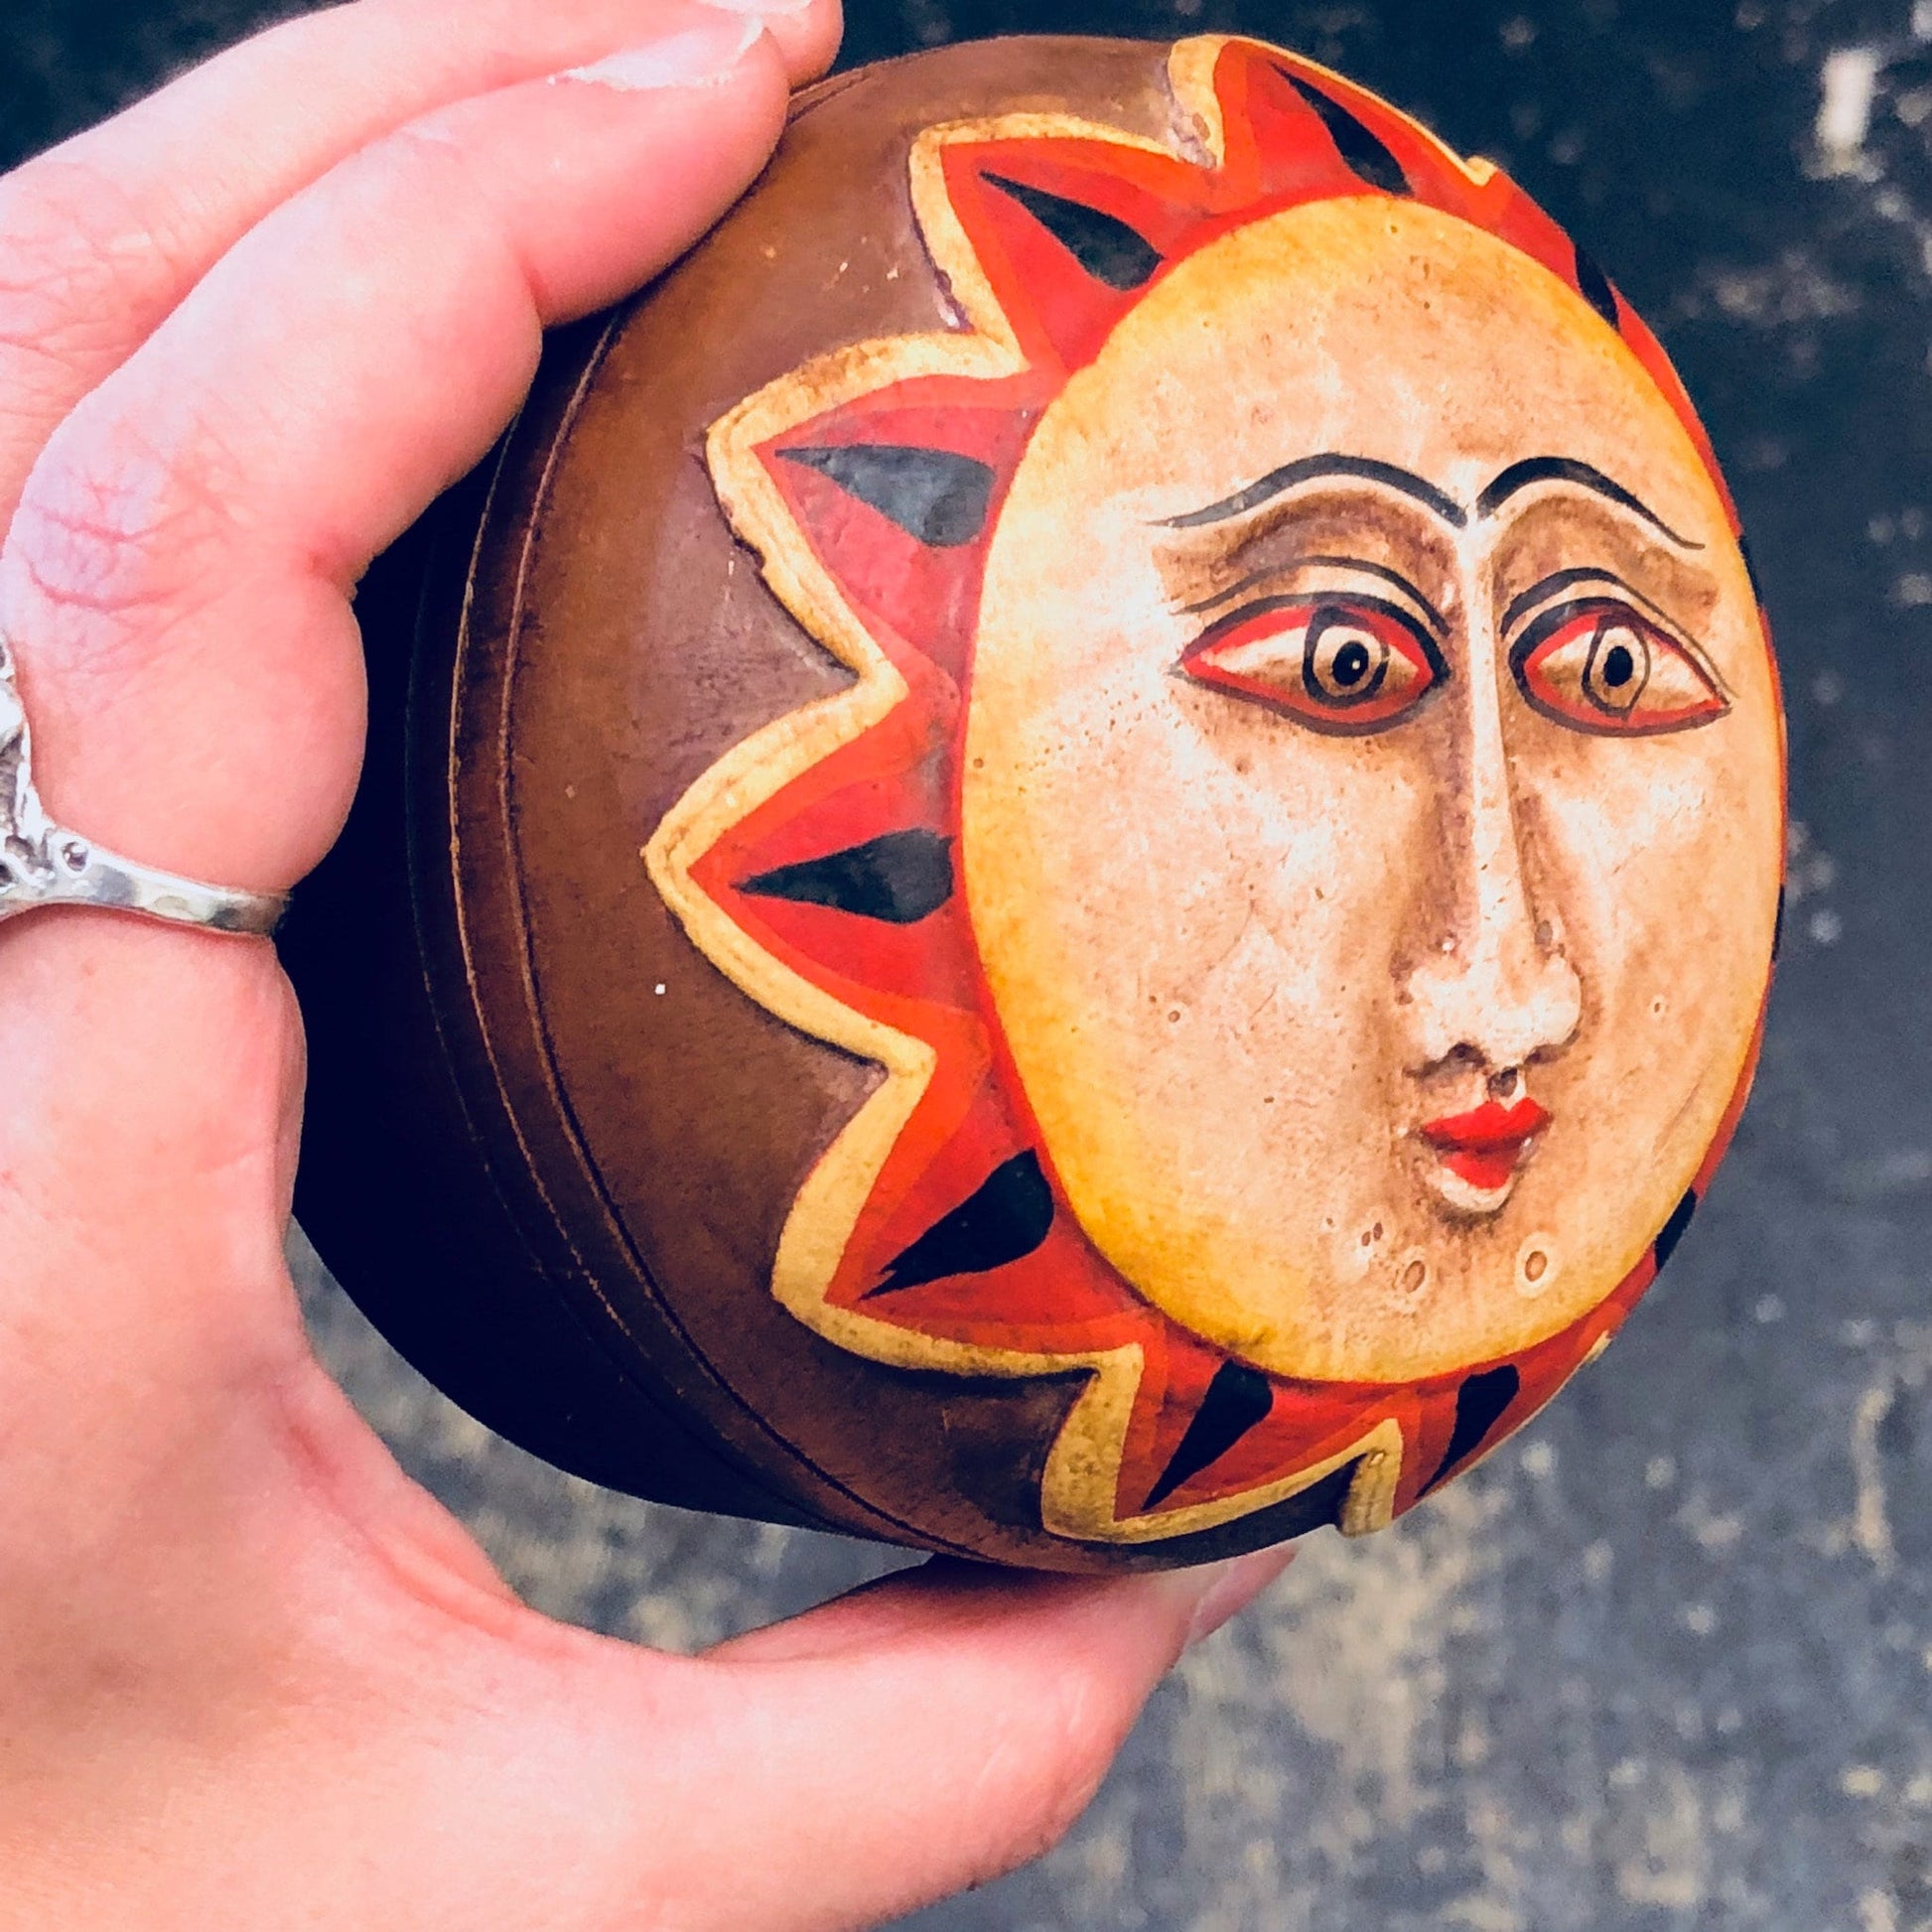 Vintage hand-carved wooden box with a decorative sun face design in red, orange, and yellow colors, used as a jewelry box or lidded container for home decor.